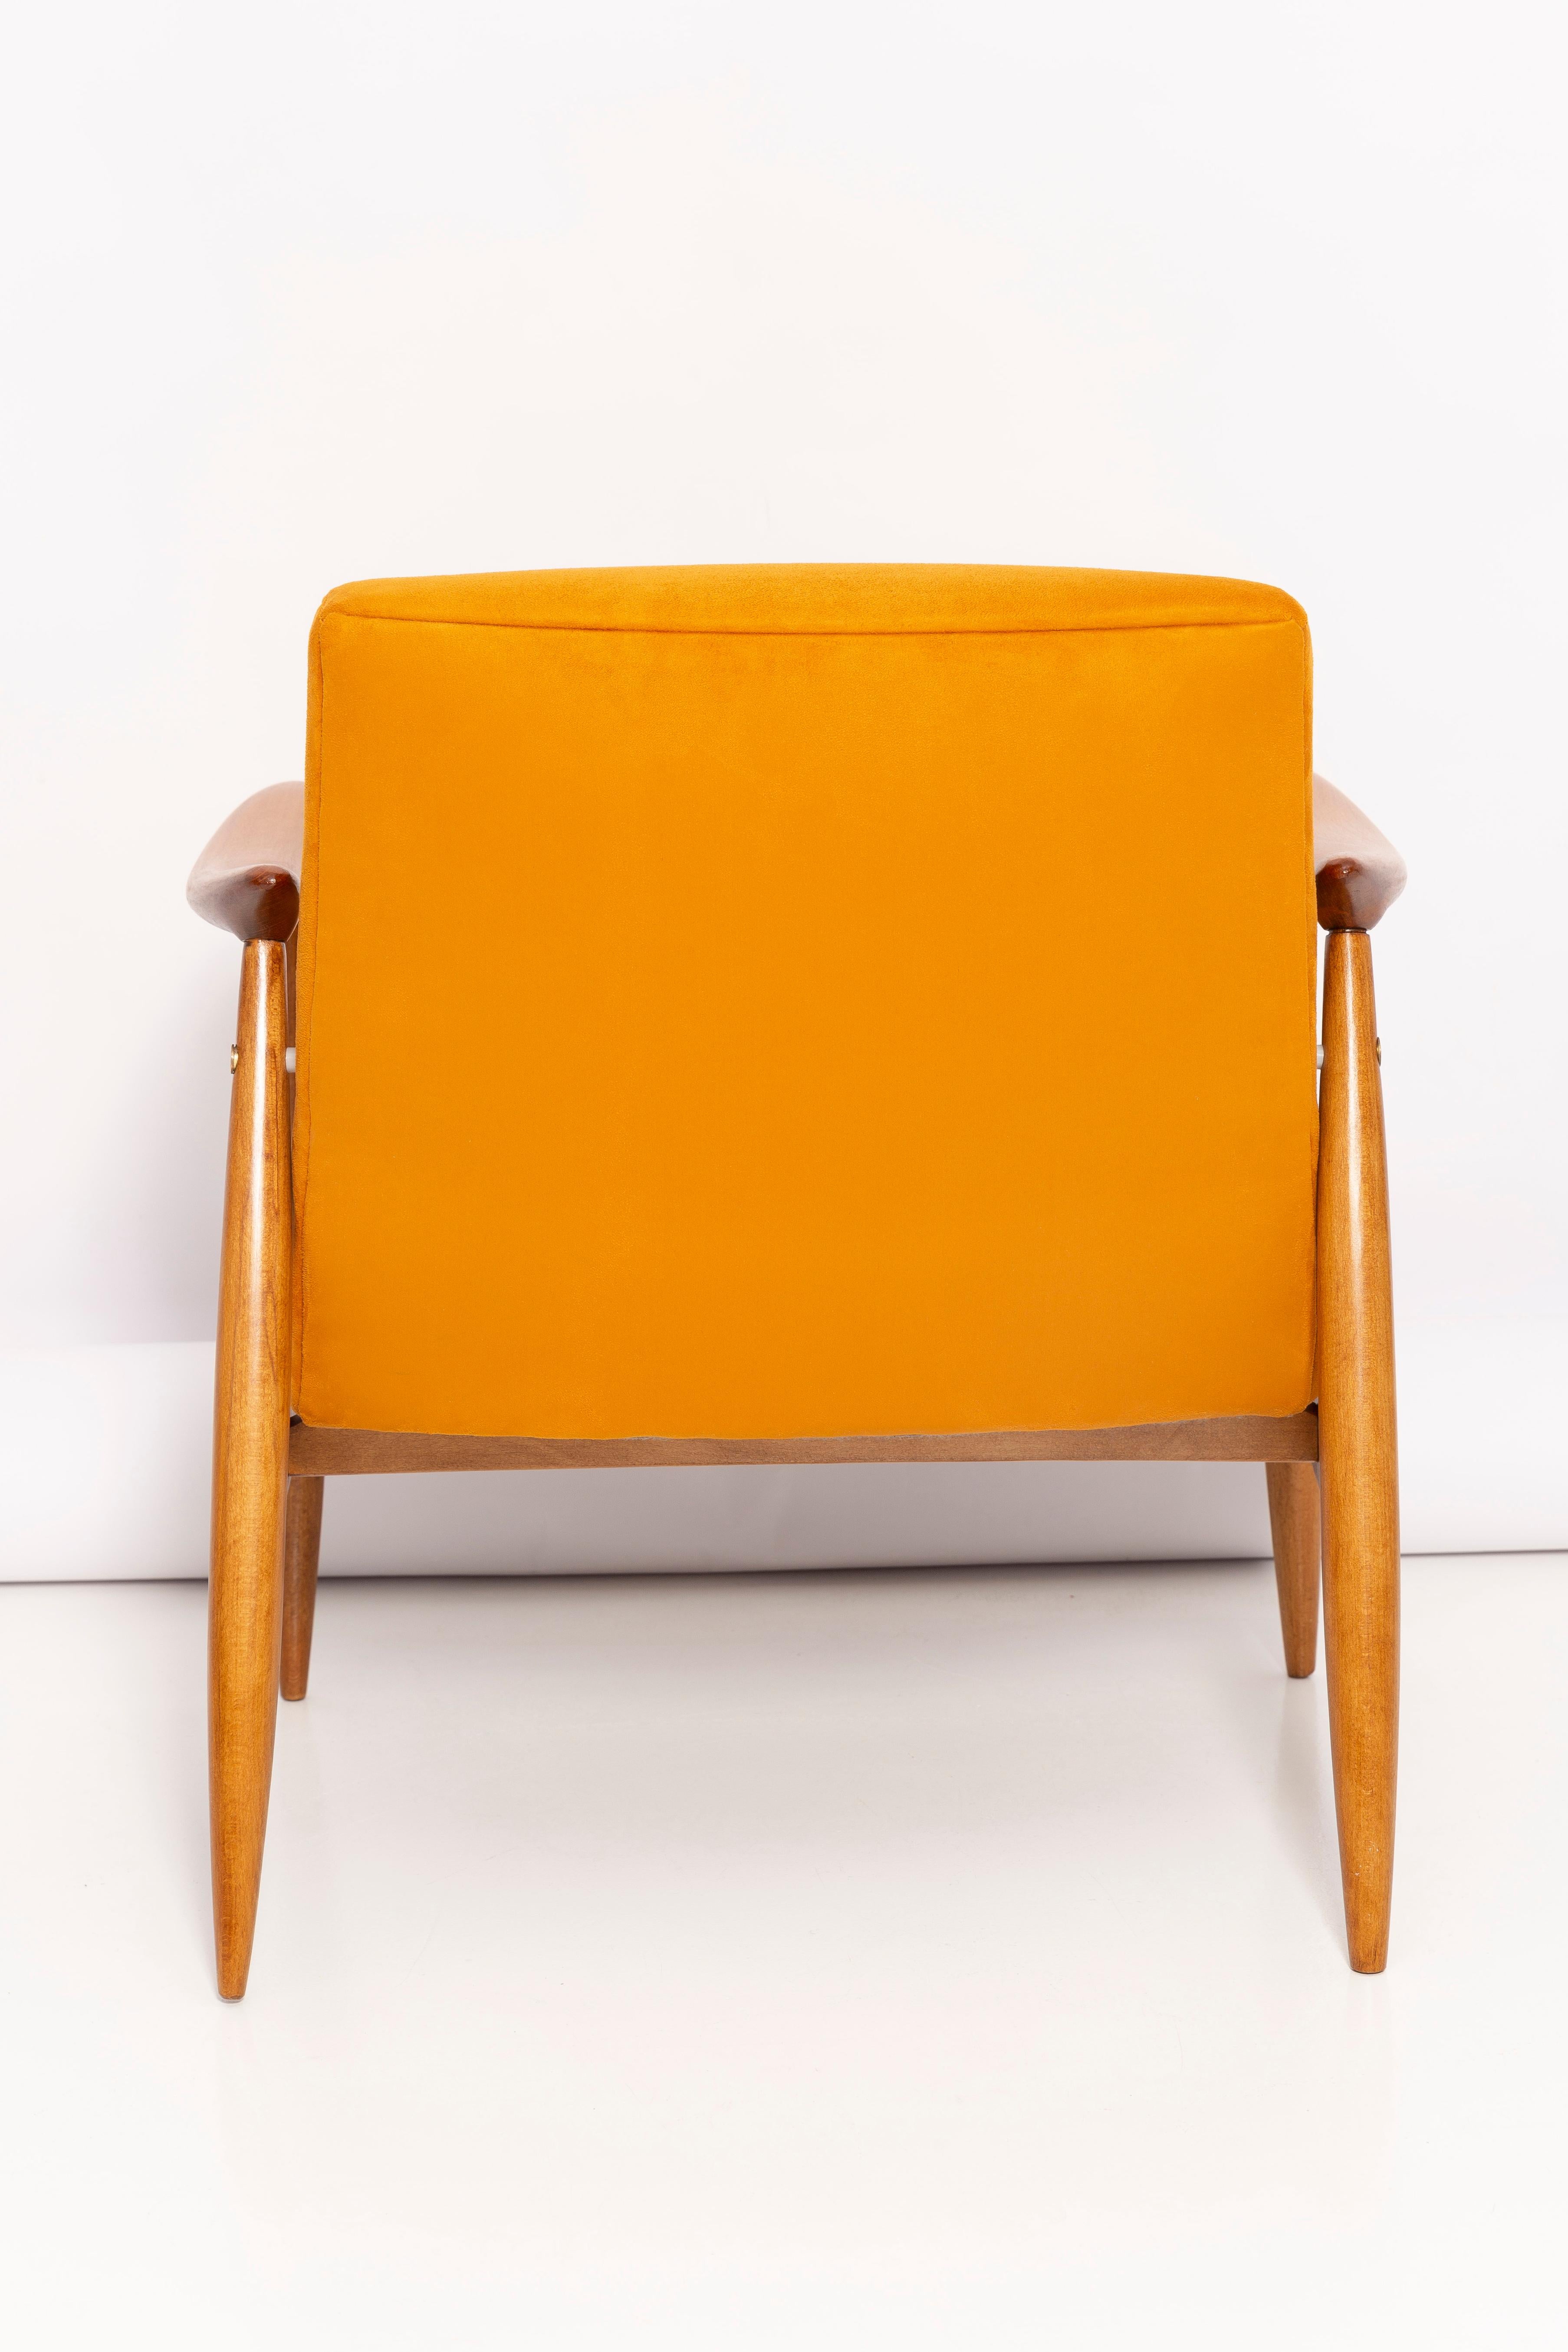 Pair of Mid Century Yellow Armchairs, Designed by J. Kedziorek, Poland, 1960s For Sale 5